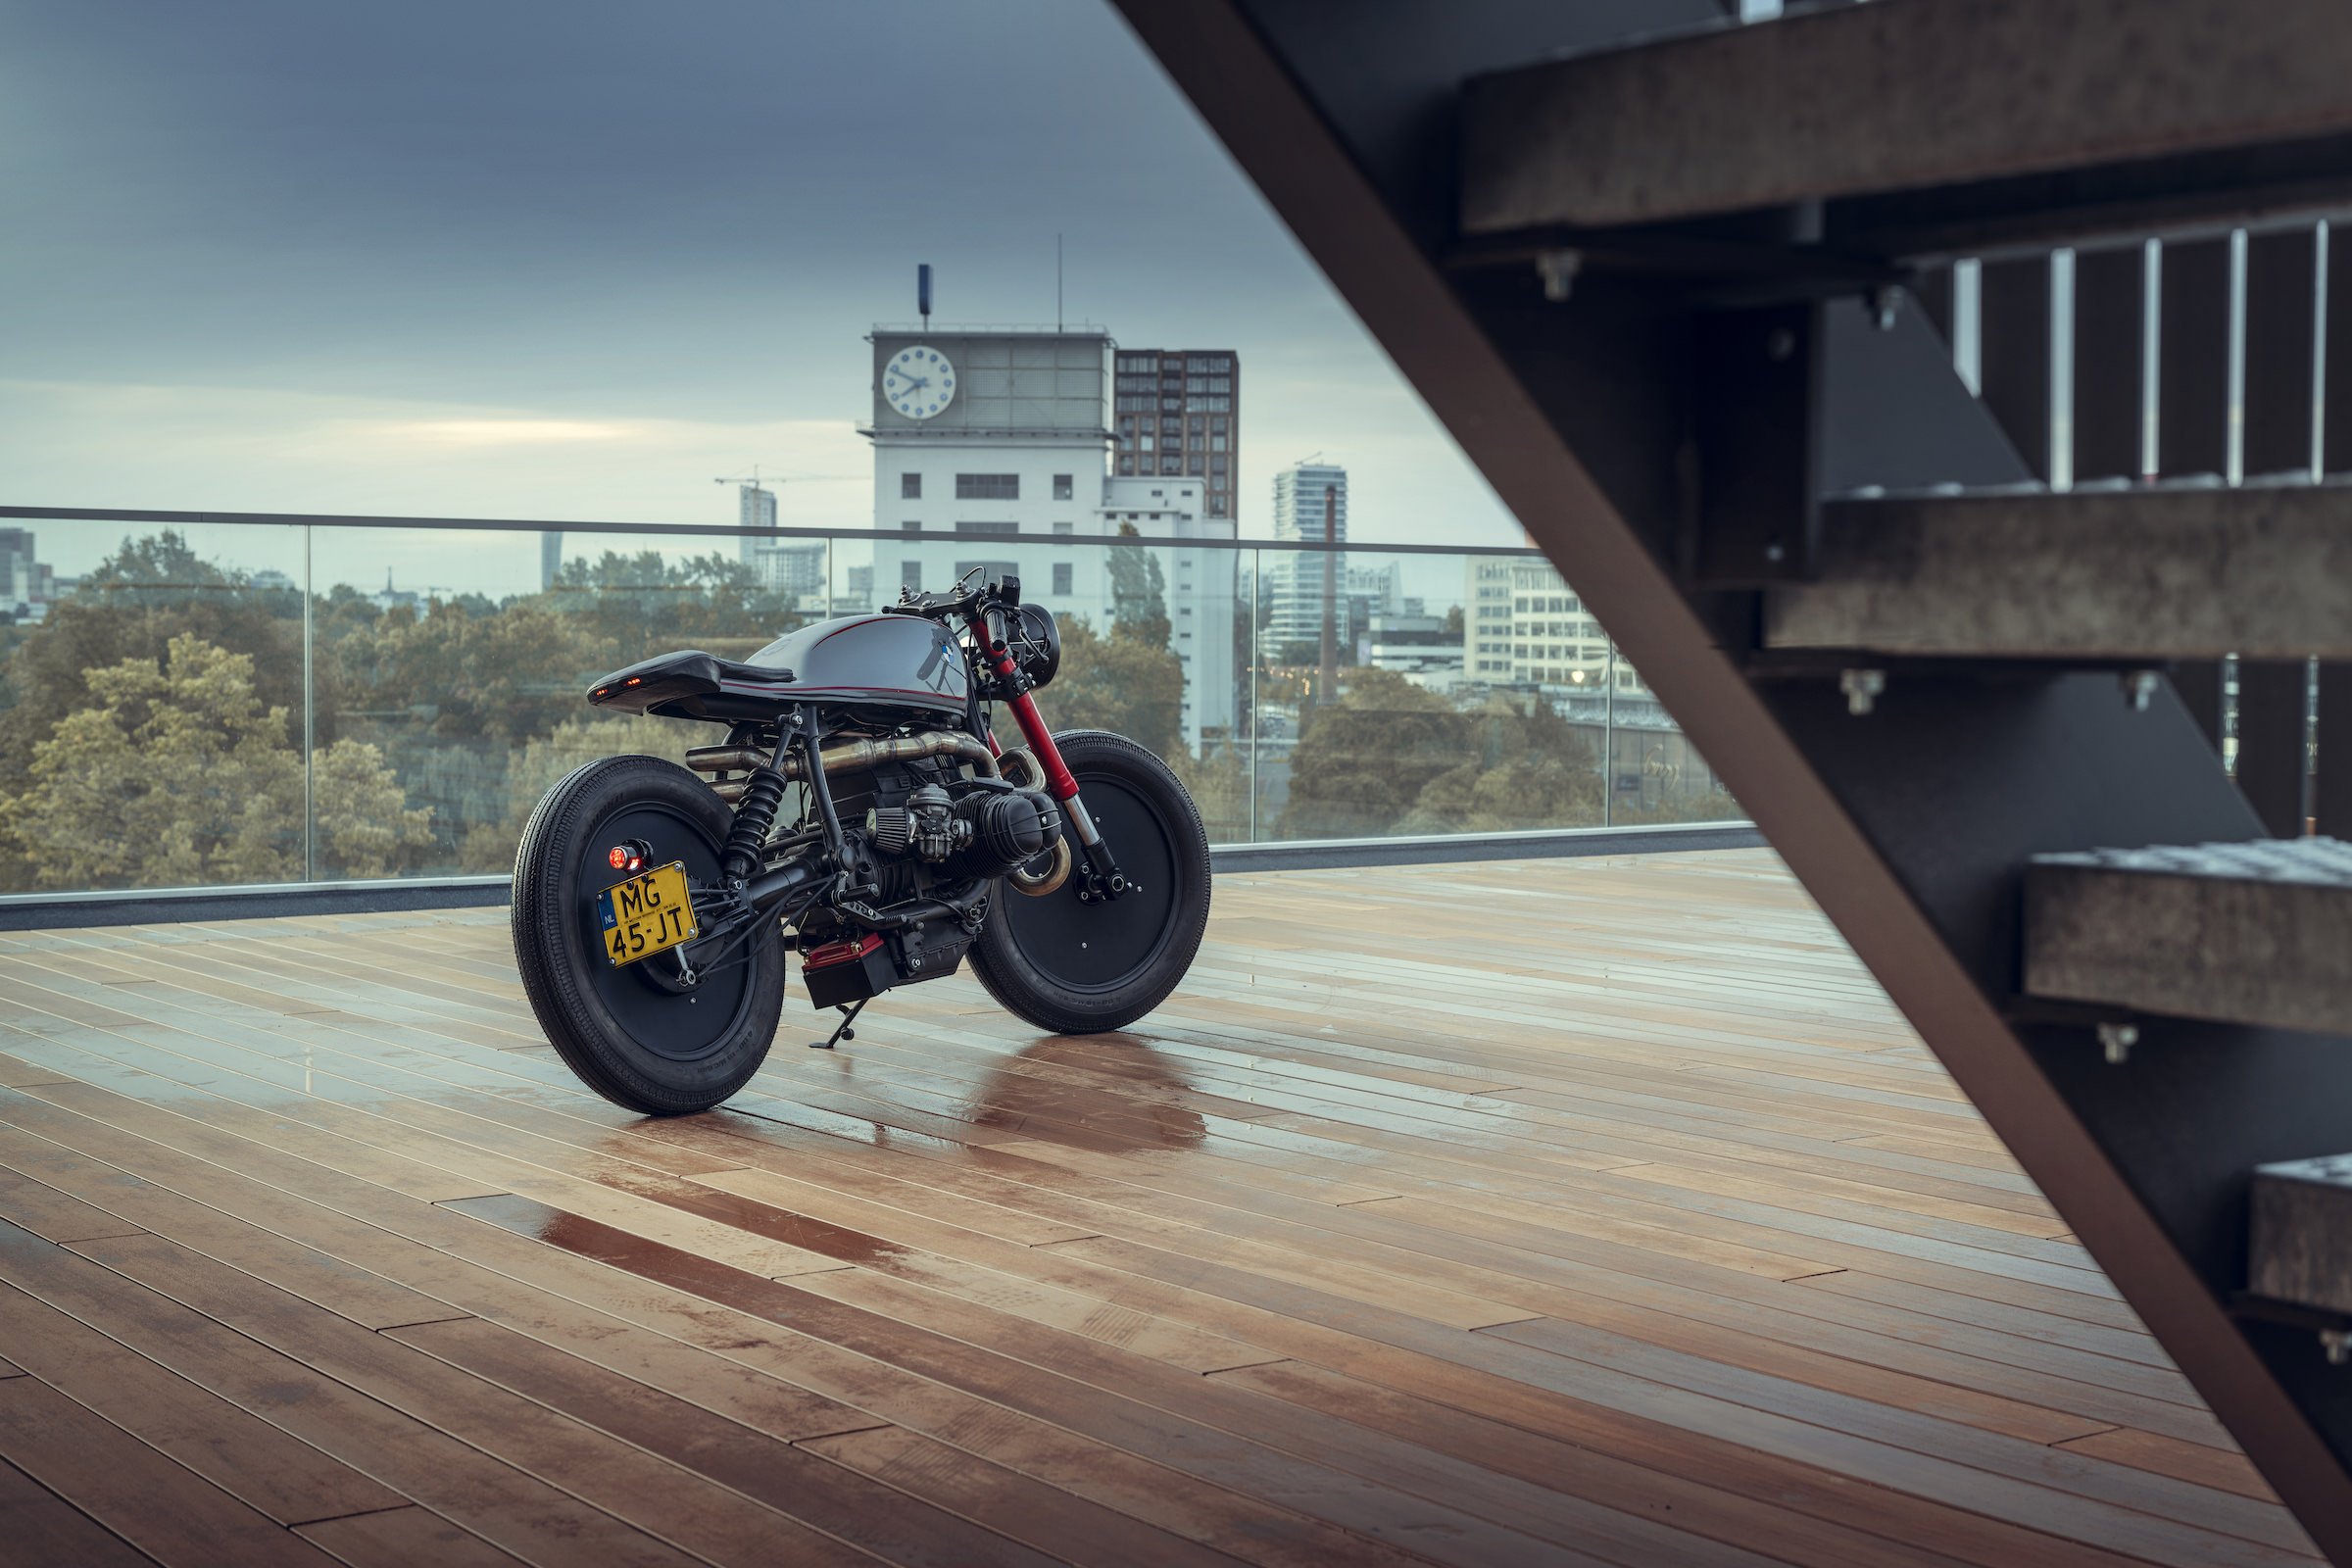 Retrofuture A BMW R80 RT Cafe Racer by Moto Adonis